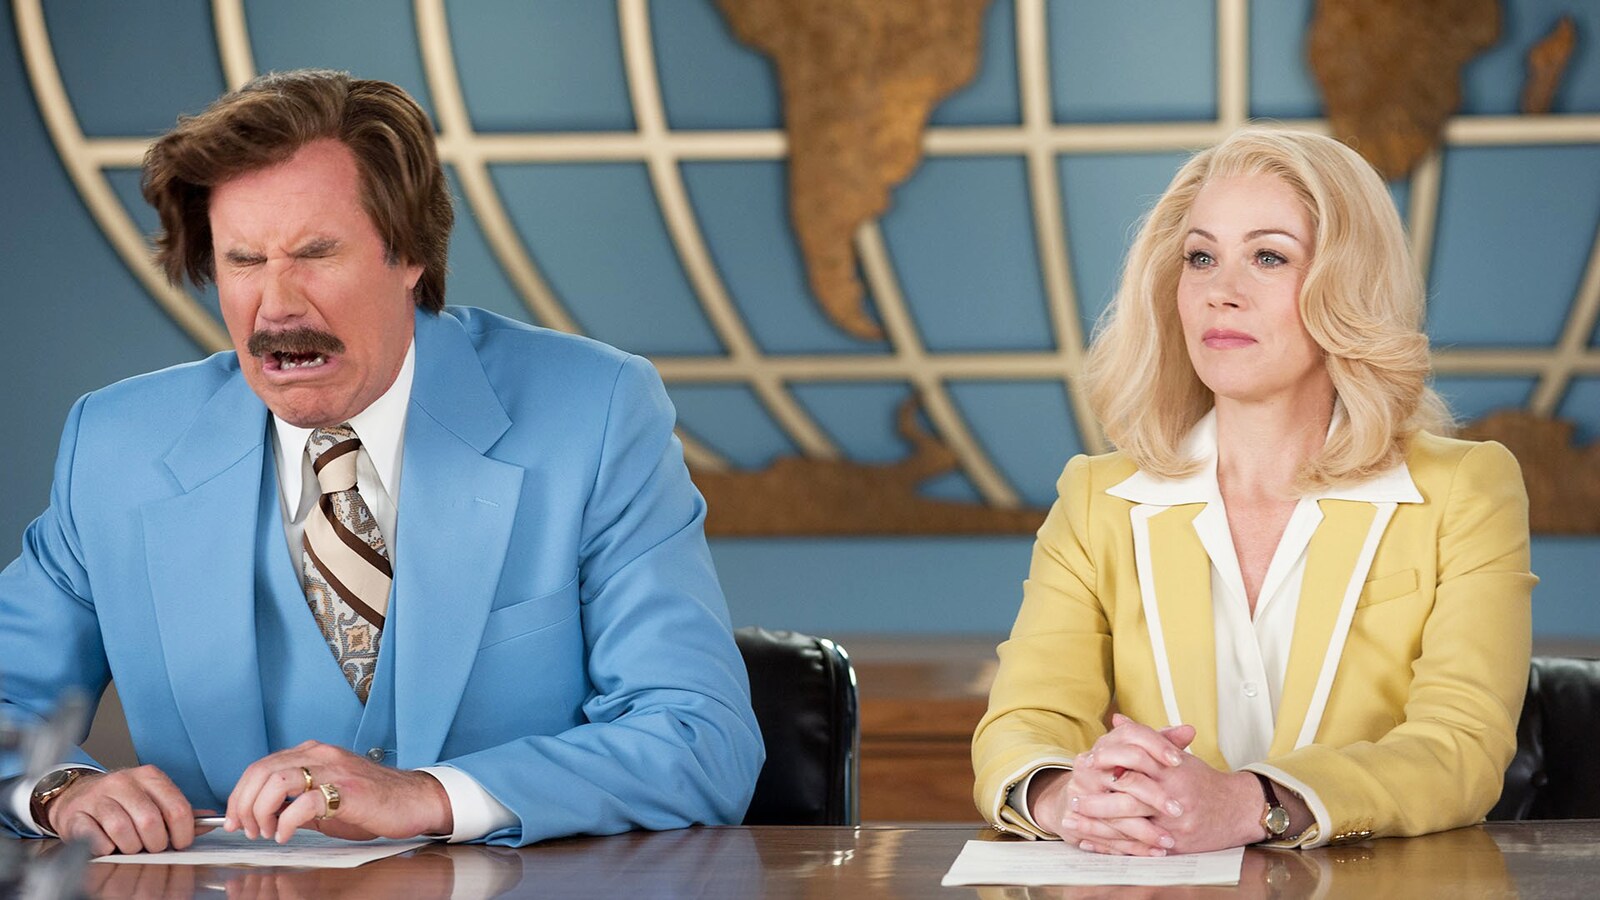 anchorman-2-the-legend-continues-2013